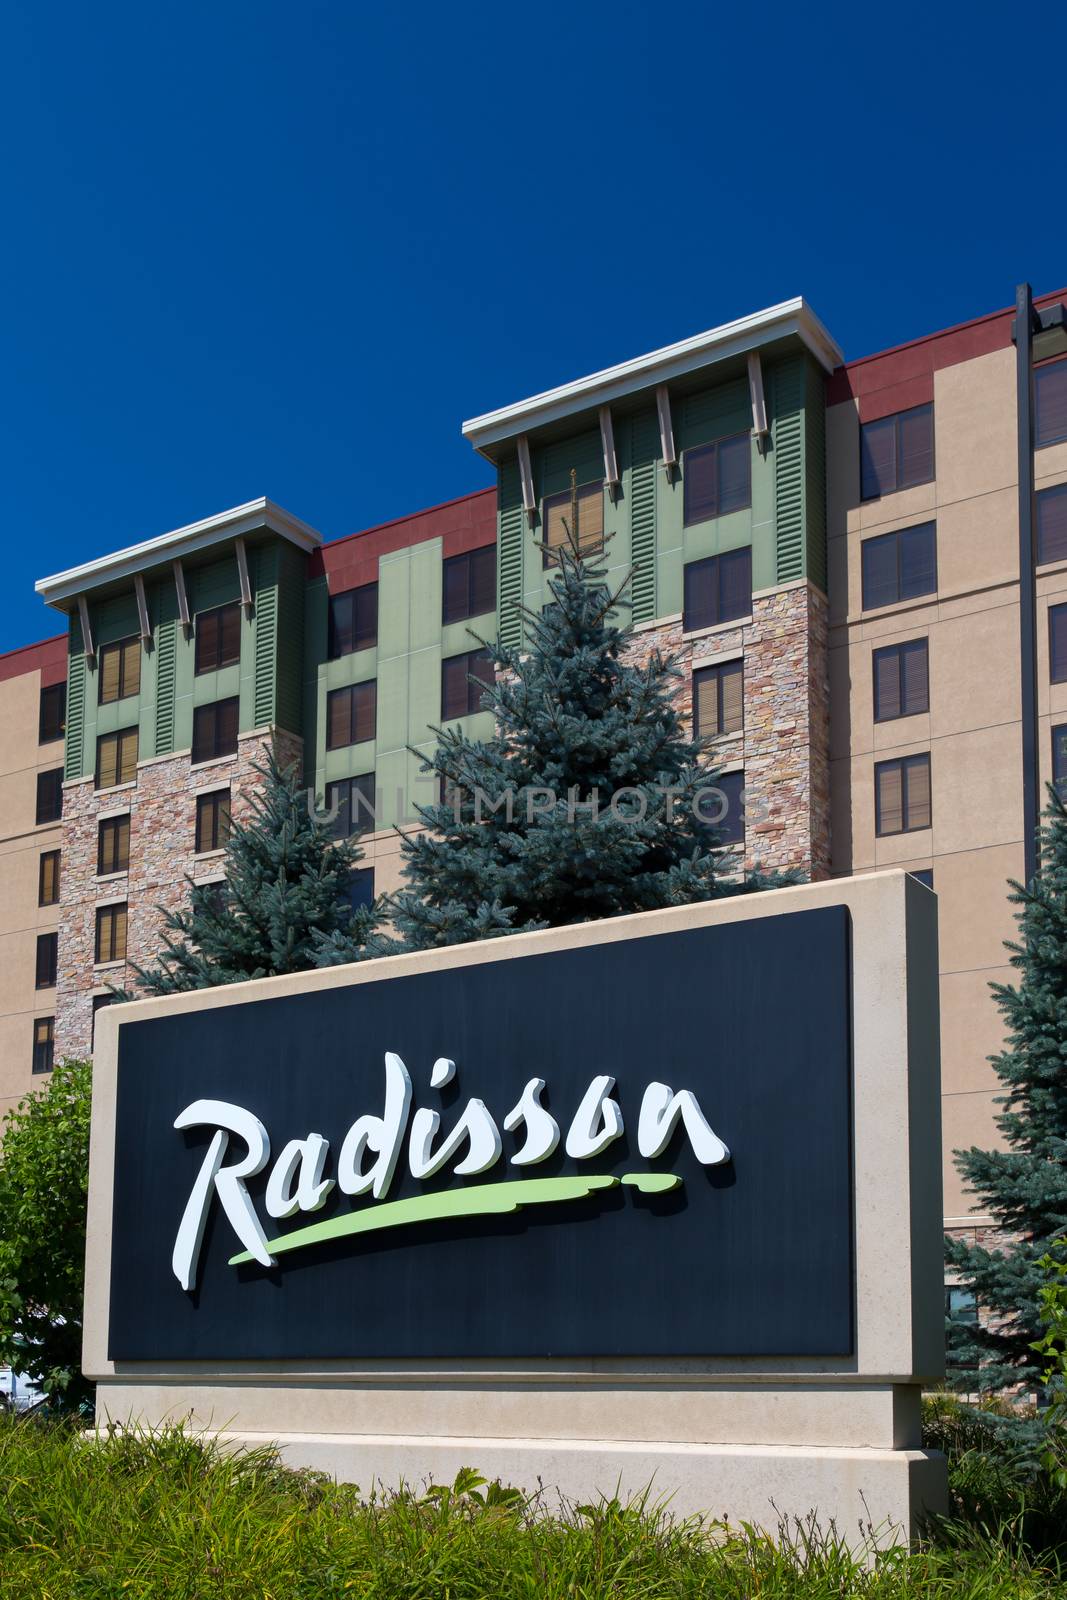 BLOOMINGTON, MN/USA - August 12, 2015: Radisson hotel and sign. Radisson Hotels is an international hotel company with more than 990 locations in 73 countries.